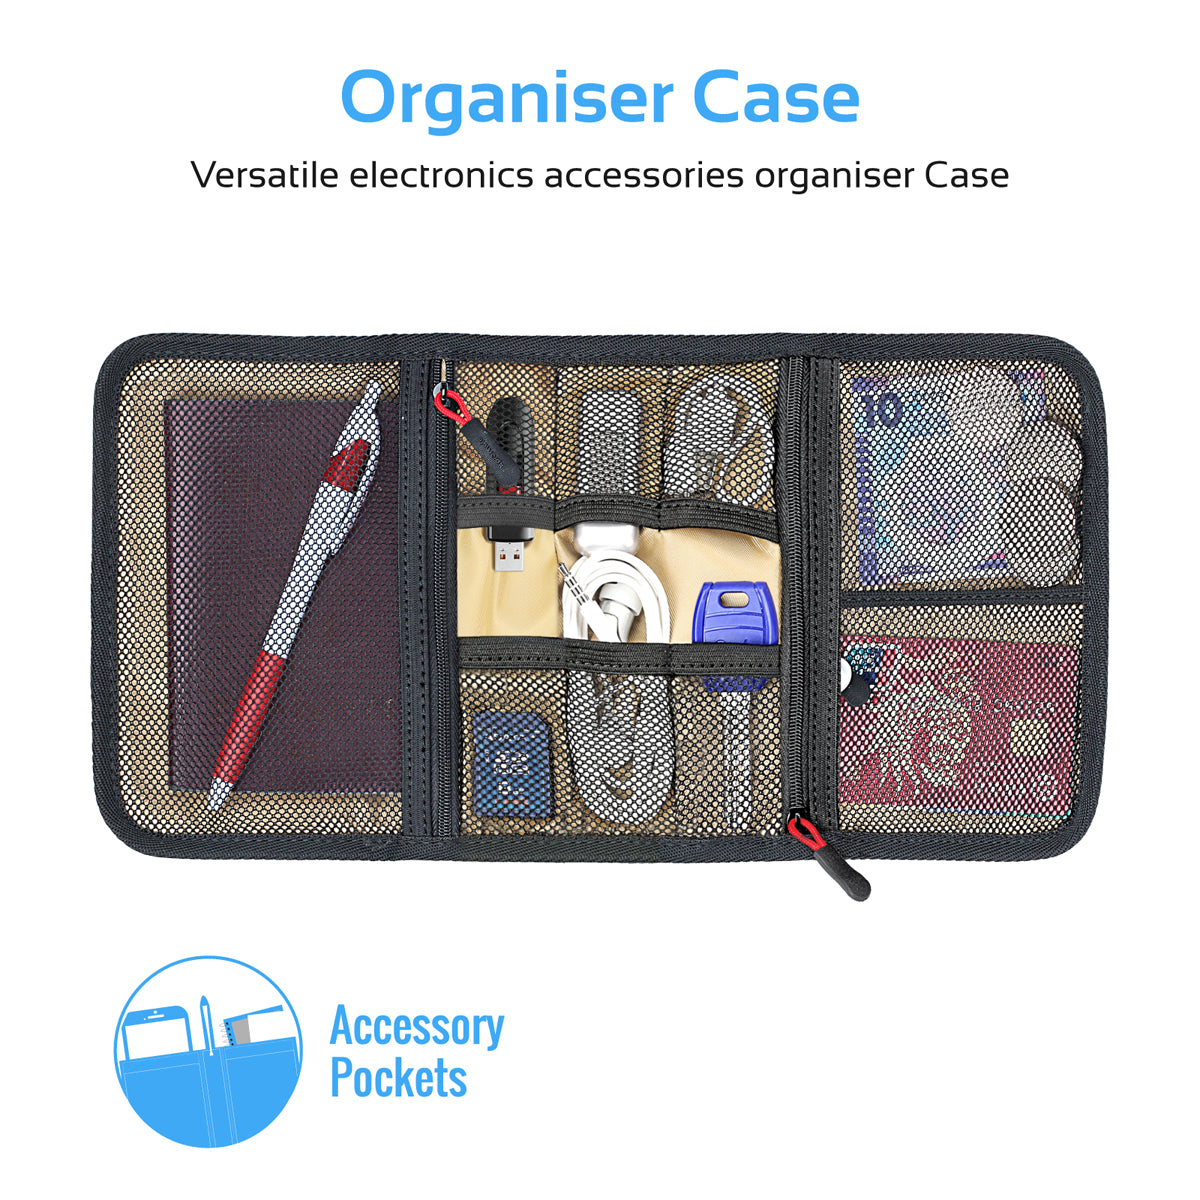 Promate - Travel Gear Organizer, Universal Gadget Accessories Travel Carry Case Storage Small Pouch with Water Resistance for Cables, Memory Cards, Earphone, Hard Drive, Travelpack-S Blue